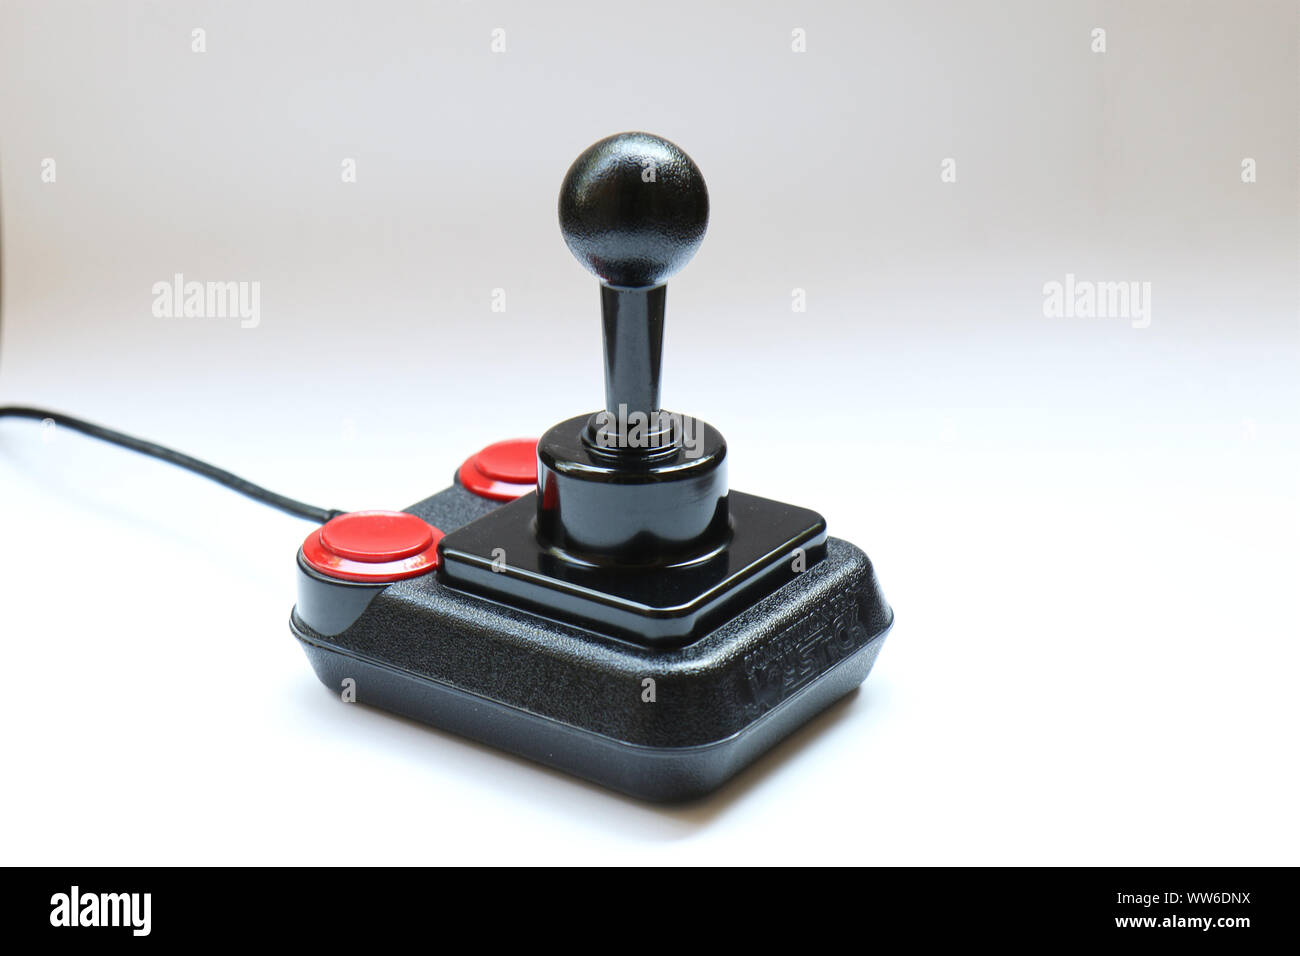 BERLIN - AUGUST 27, 2019: Classic Retro Joystick Competition Pro from the Eighties on white. It was very popular with Commodore Amiga and C64 Gaming C Stock Photo